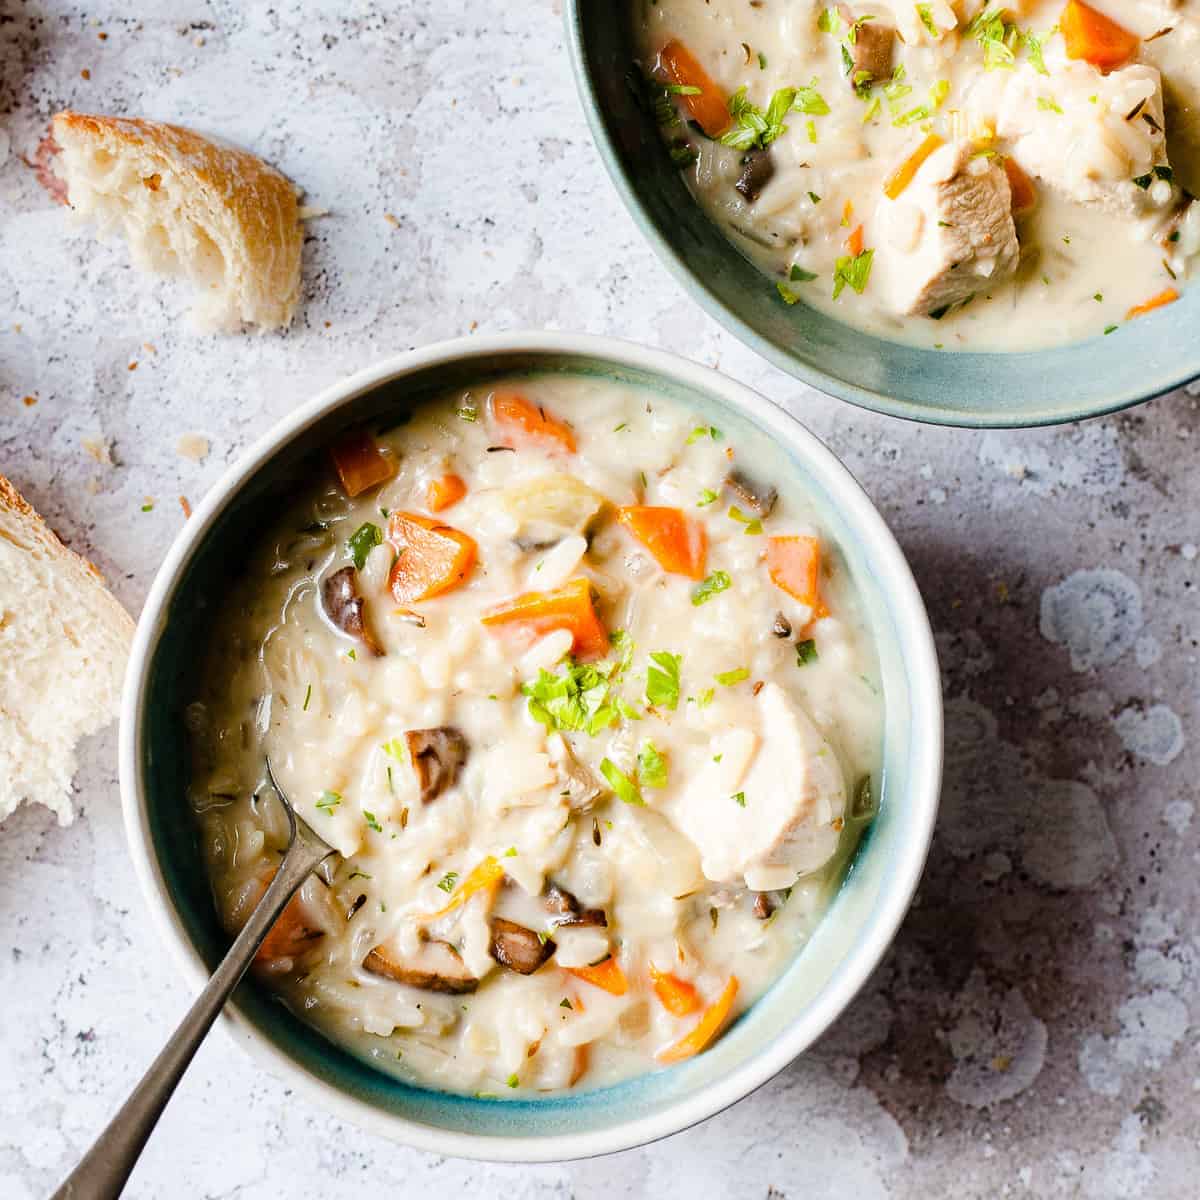 Chicken and rice soup made using Aldi ingredients.